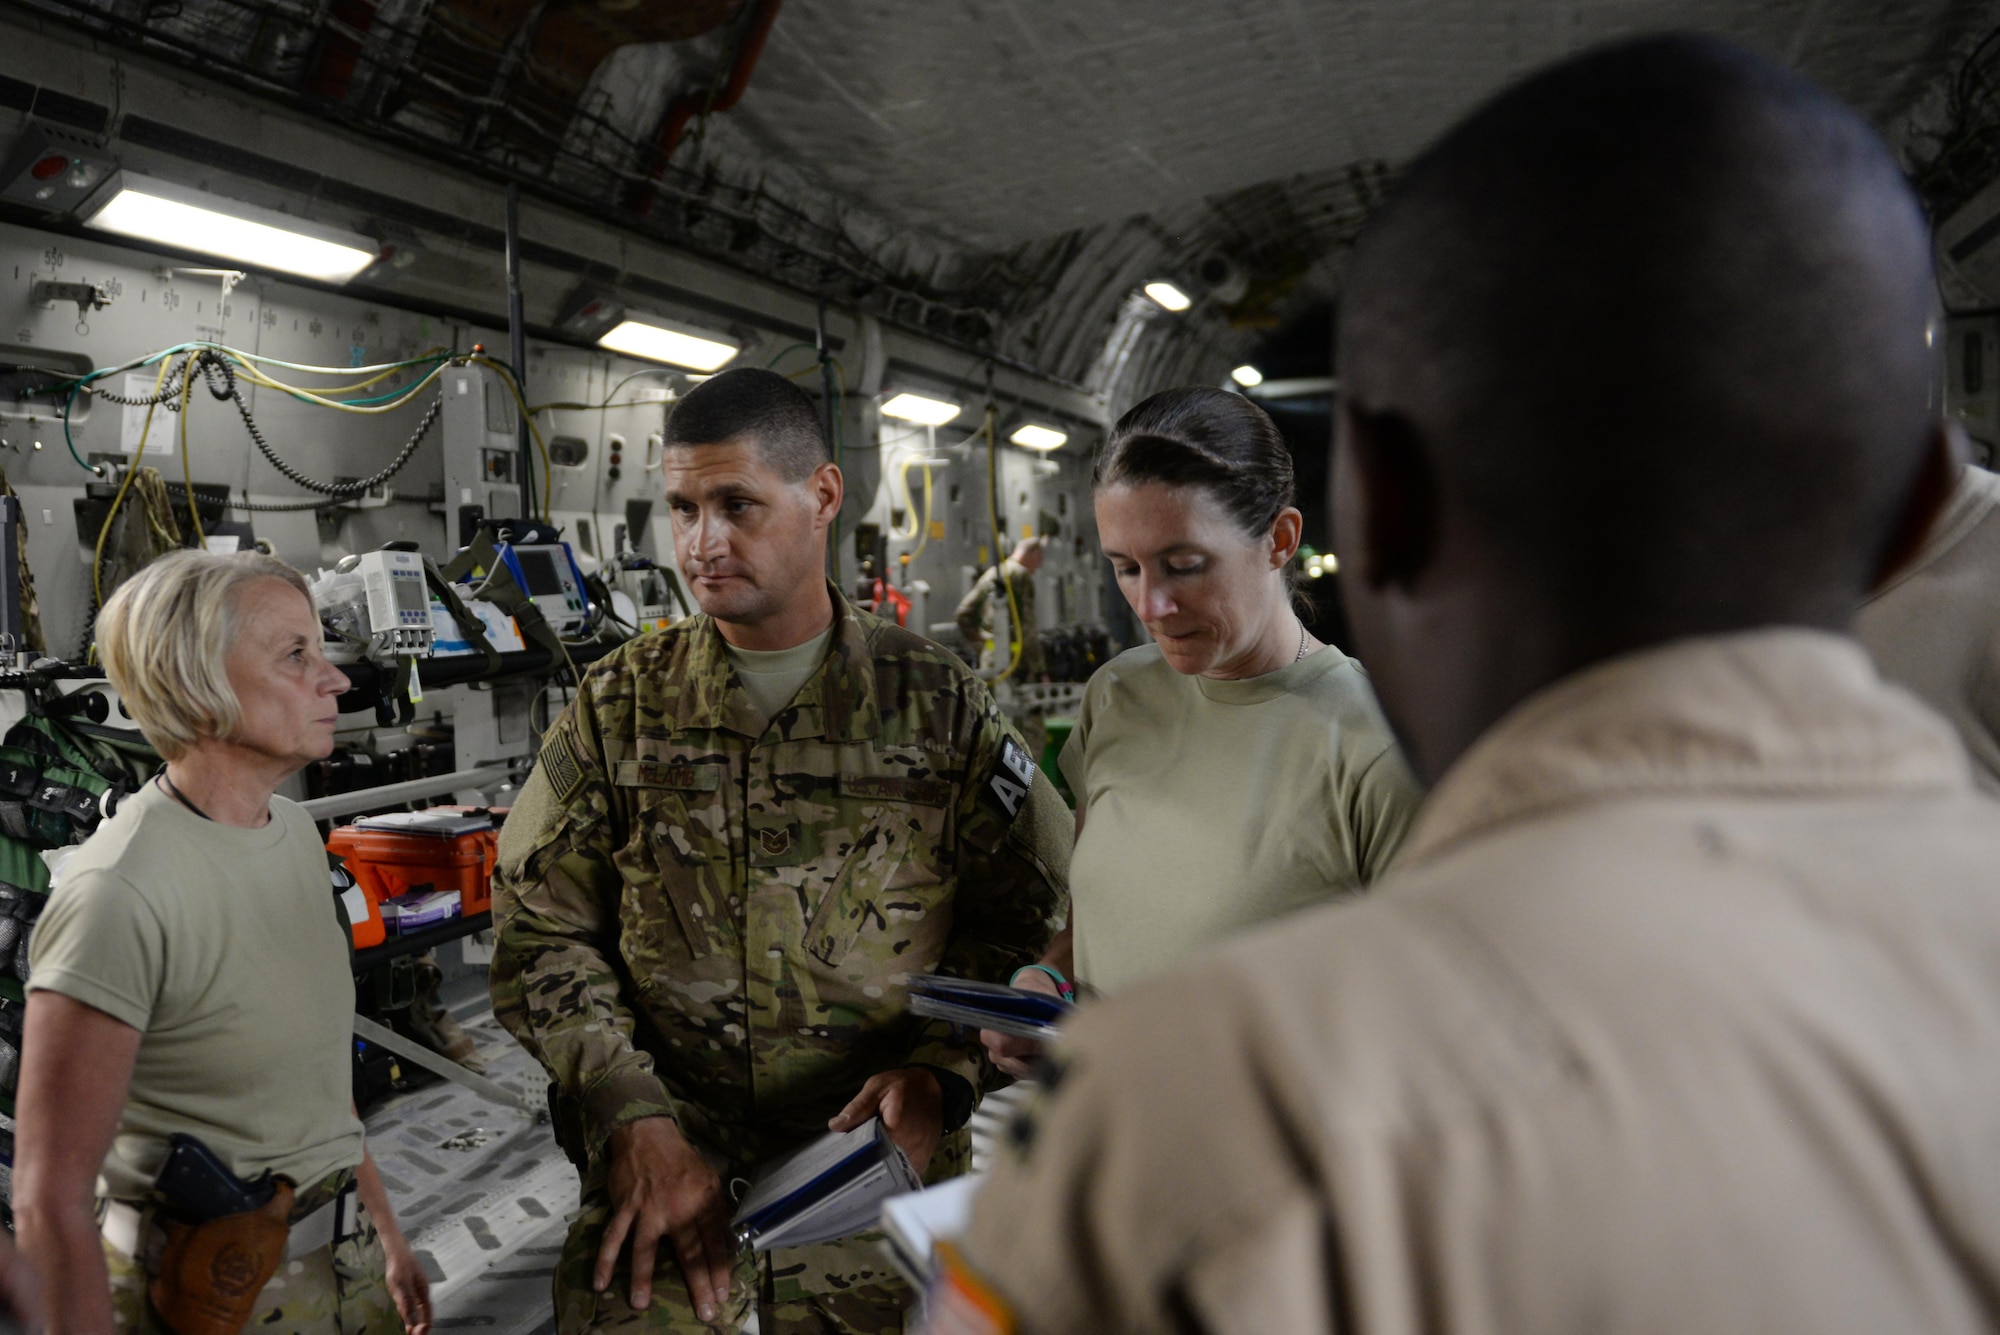 U.S. Air Force Tech. Sgt. Russell “Rusty” McLamb, center, 455th Expeditionary Aeromedical Evacuation Squadron technician deployed from the North Carolina Air National Guard’s 156th Aeromedical Evacuation Squadron, participates in a crew brief on a C-17 Globemaster III aircraft on the flight line at Bagram Airfield, Afghanistan, Aug. 8, 2015, prior to an aeromedical evacuation mission to Germany. McLamb is part of the 455th EAES, which is responsible for evacuating the sick and wounded from Central Command to higher echelons of medical care. (U.S. Air Force photo by Maj. Tony Wickman/Released)